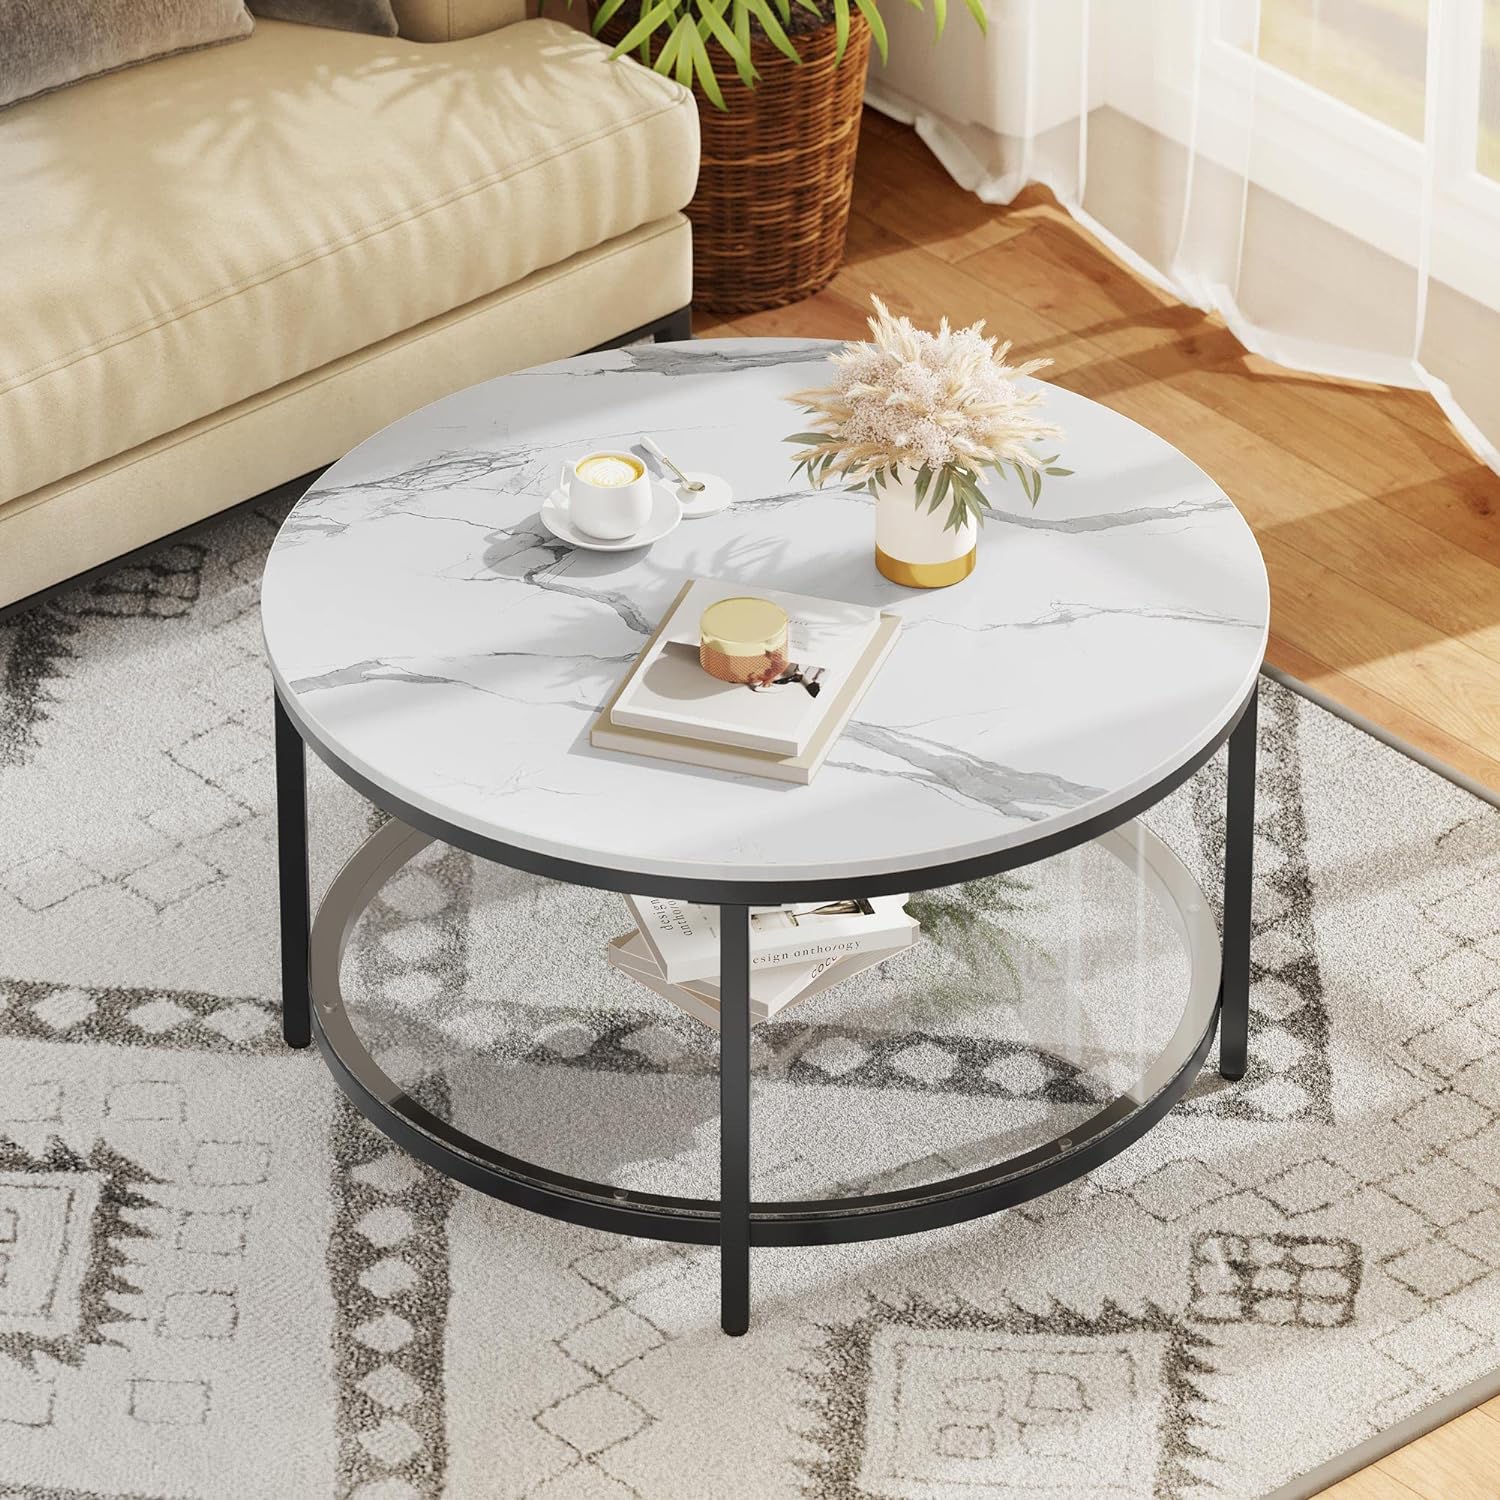 YITAHOME White Marble Round Coffee Table with Glass, Black for Living Room, 2-Tier Circle Coffee Table with Storage Clear Coffee Table, Simple Modern Center Cocktail Table, White & Black